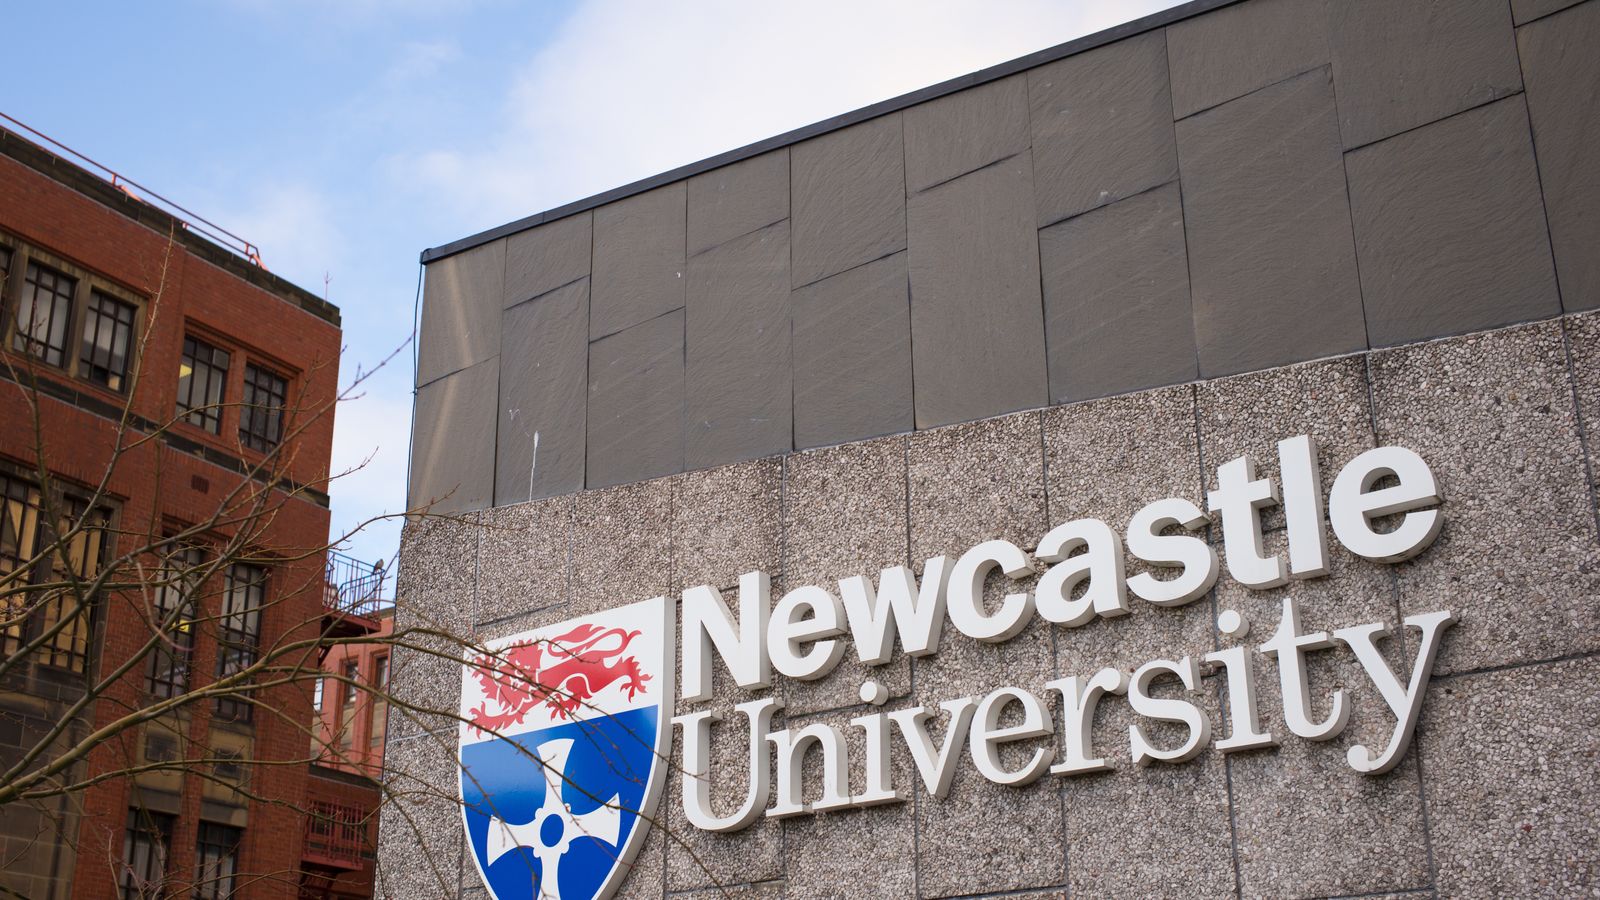 man-18-arrested-after-newcastle-university-student-found-dead-at-halls